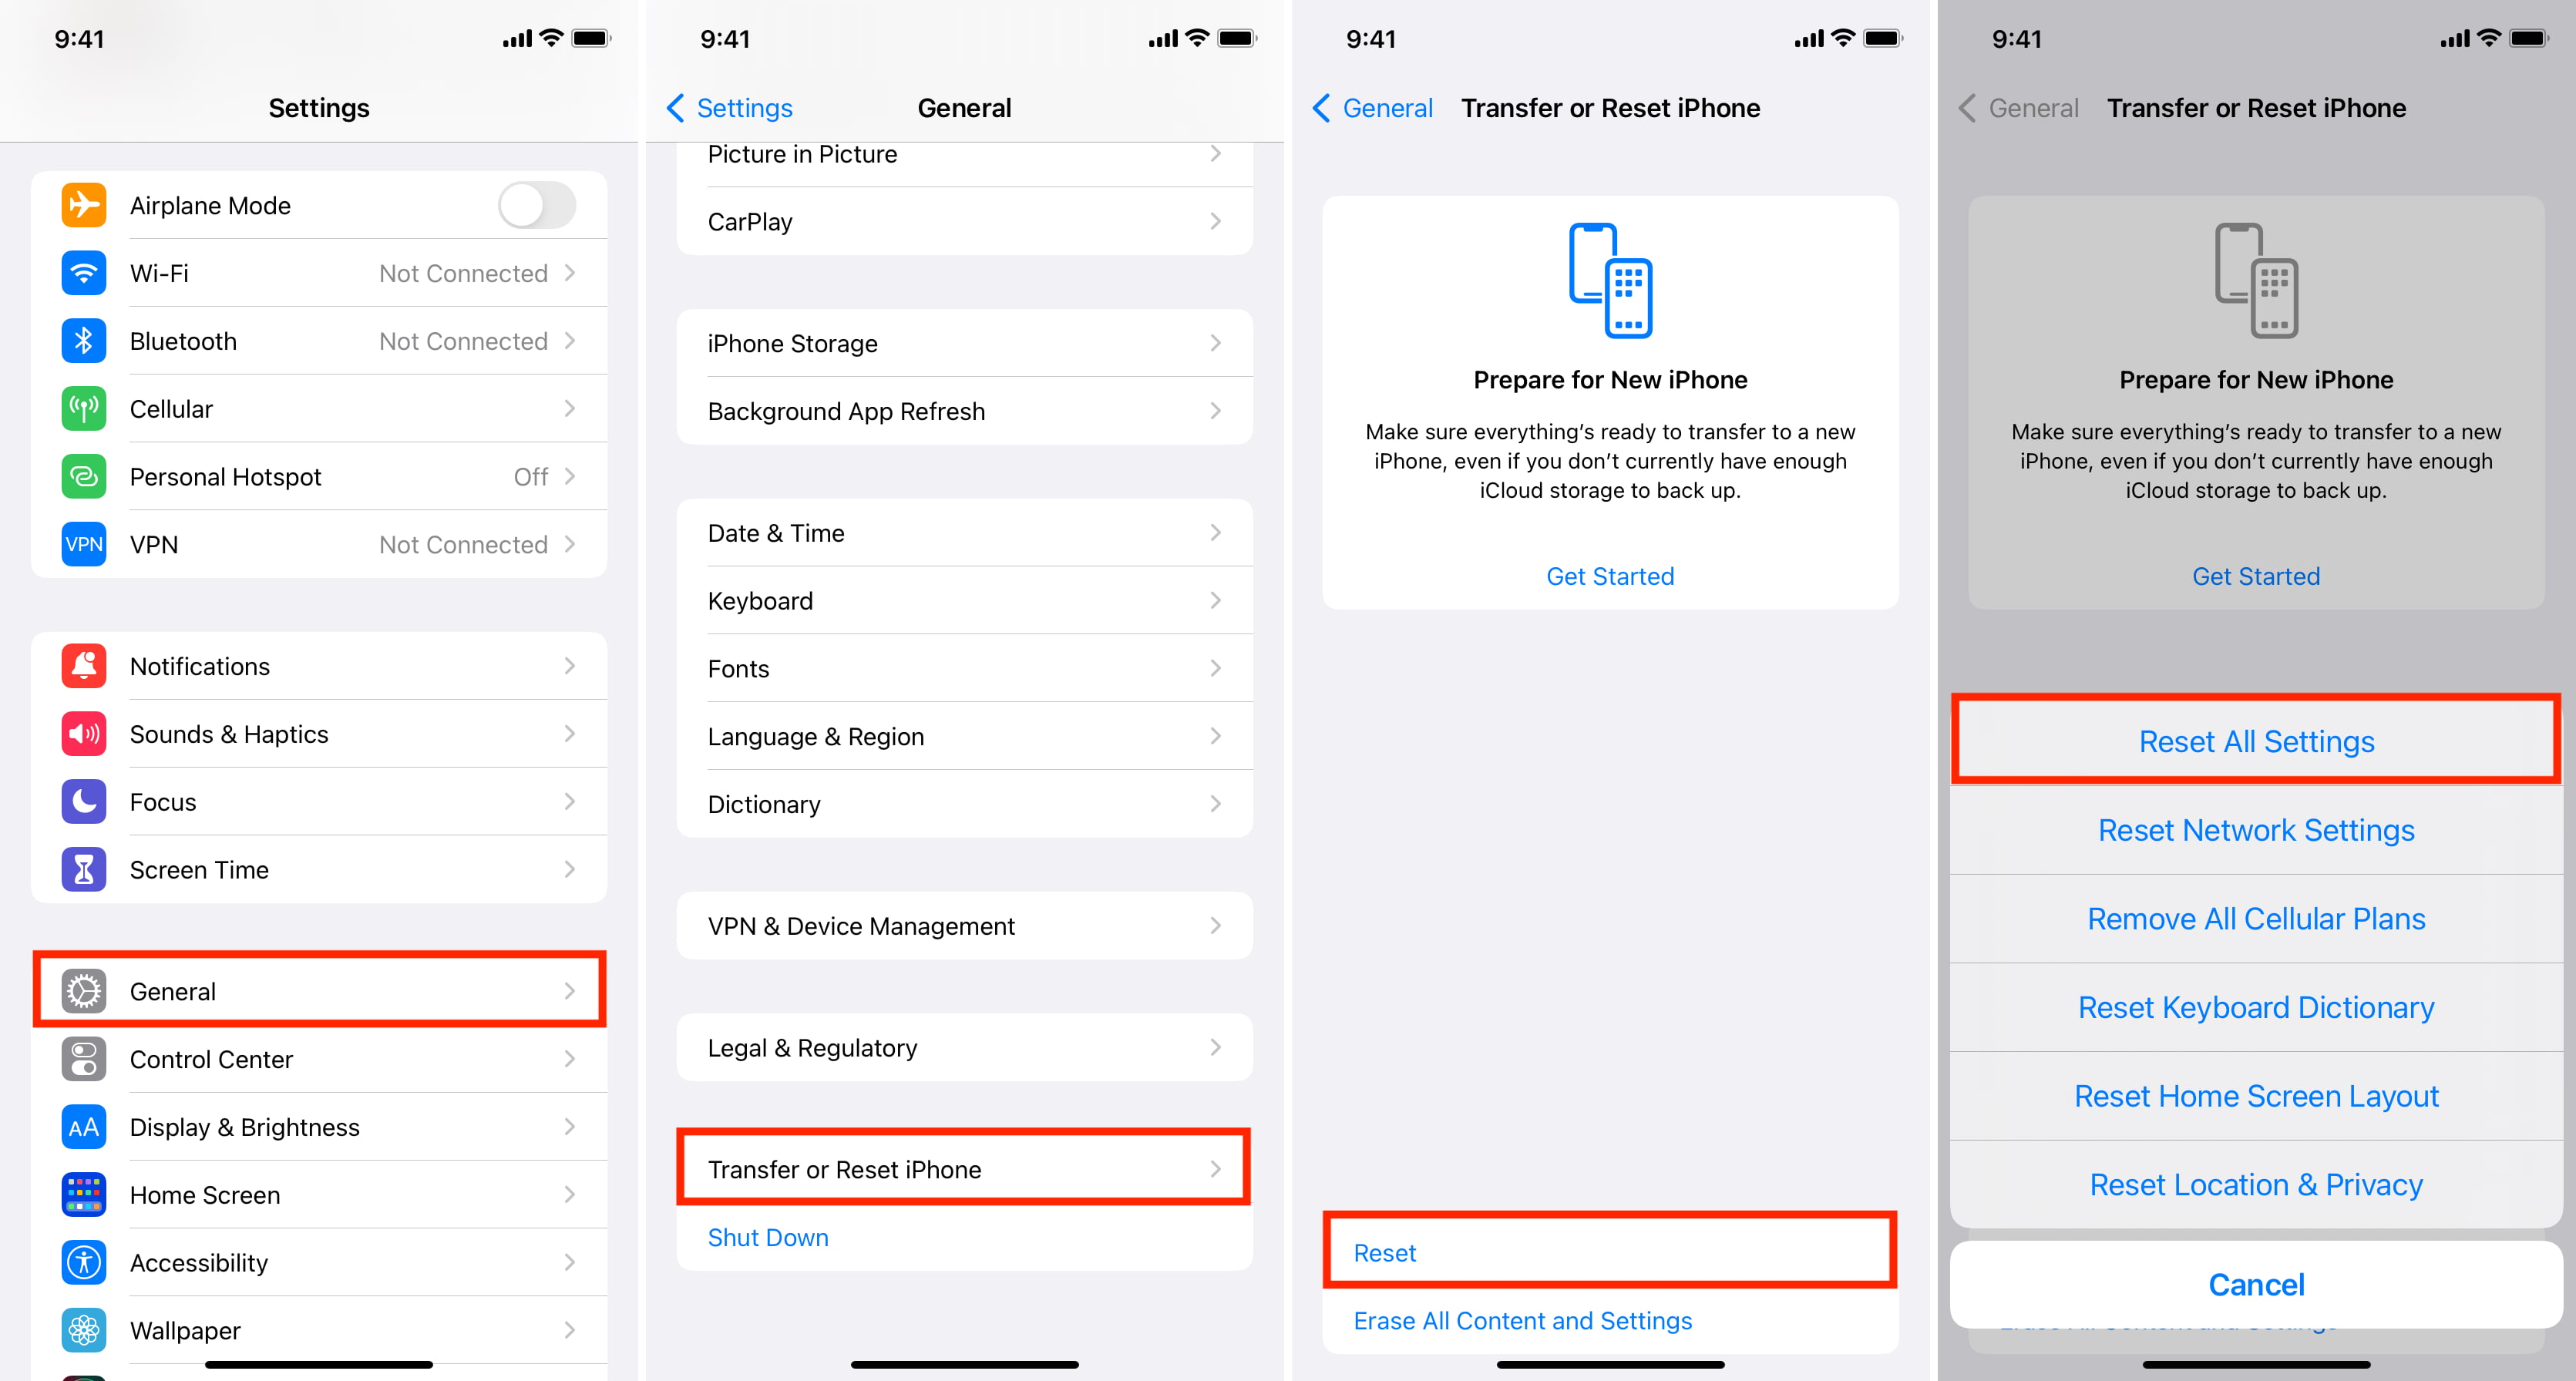 Steps to Reset All Settings on iPhone